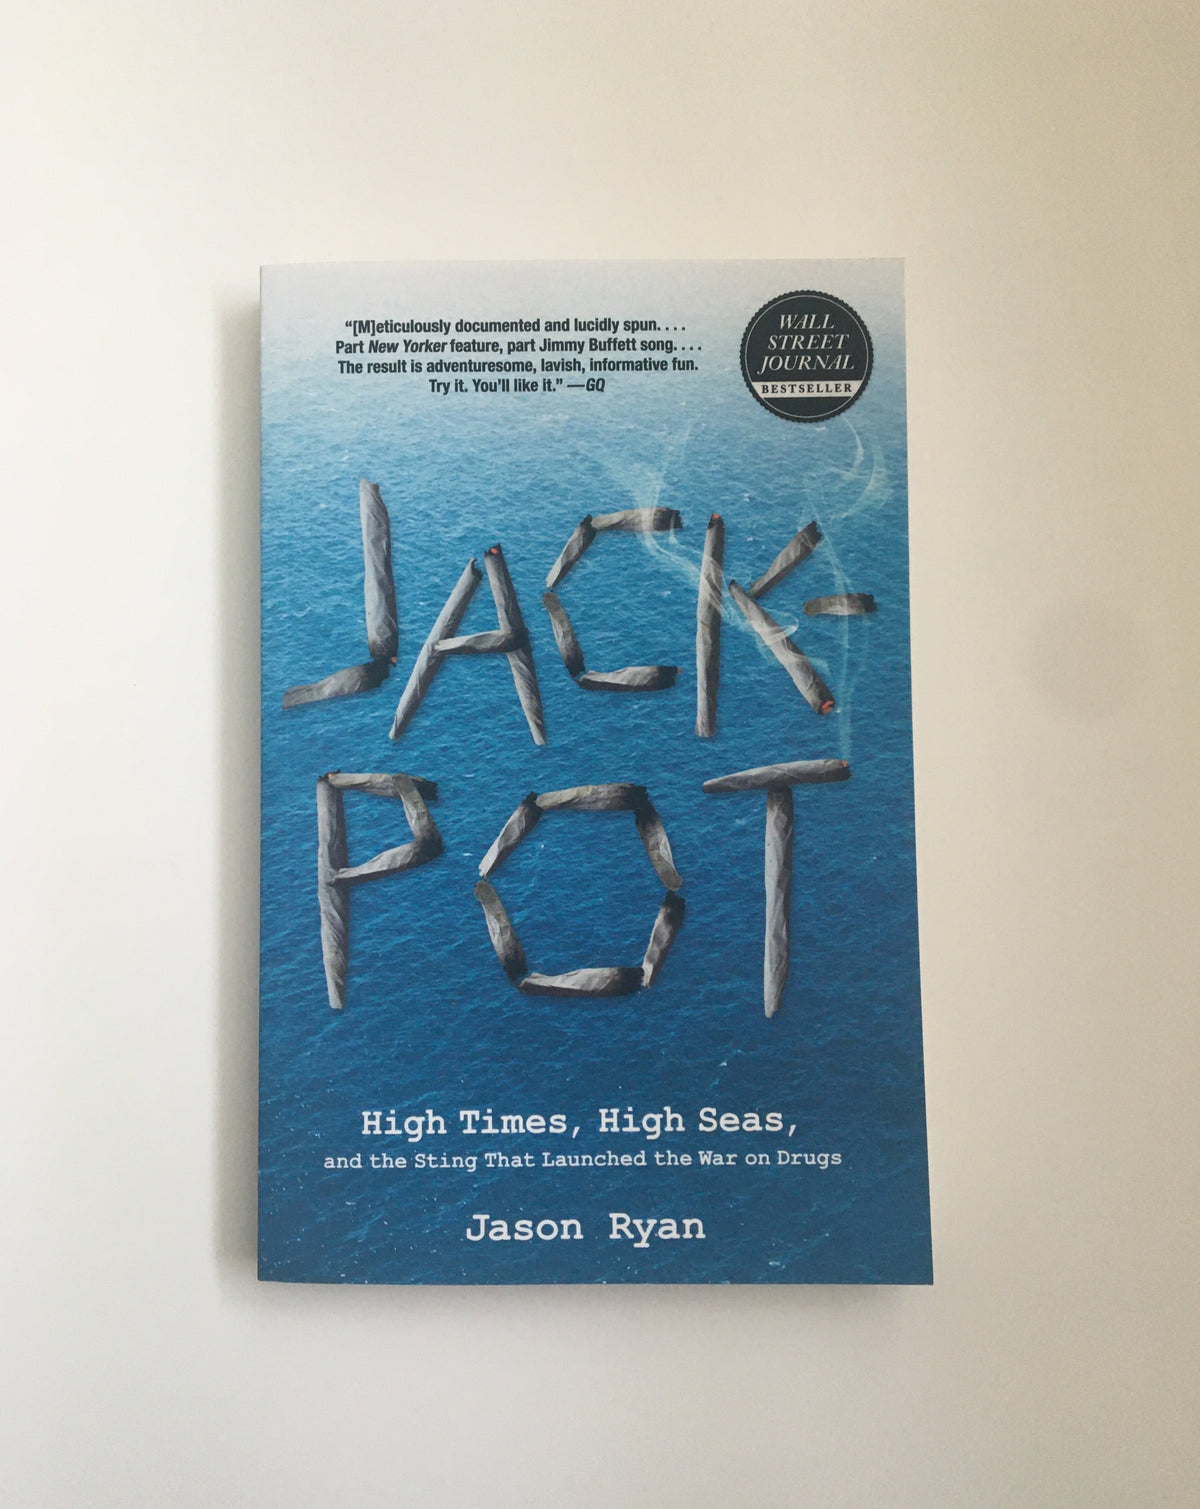 Jackpot: High Times, High Seas, and the Sting That Launched the War on Drugs by Jason Ryan